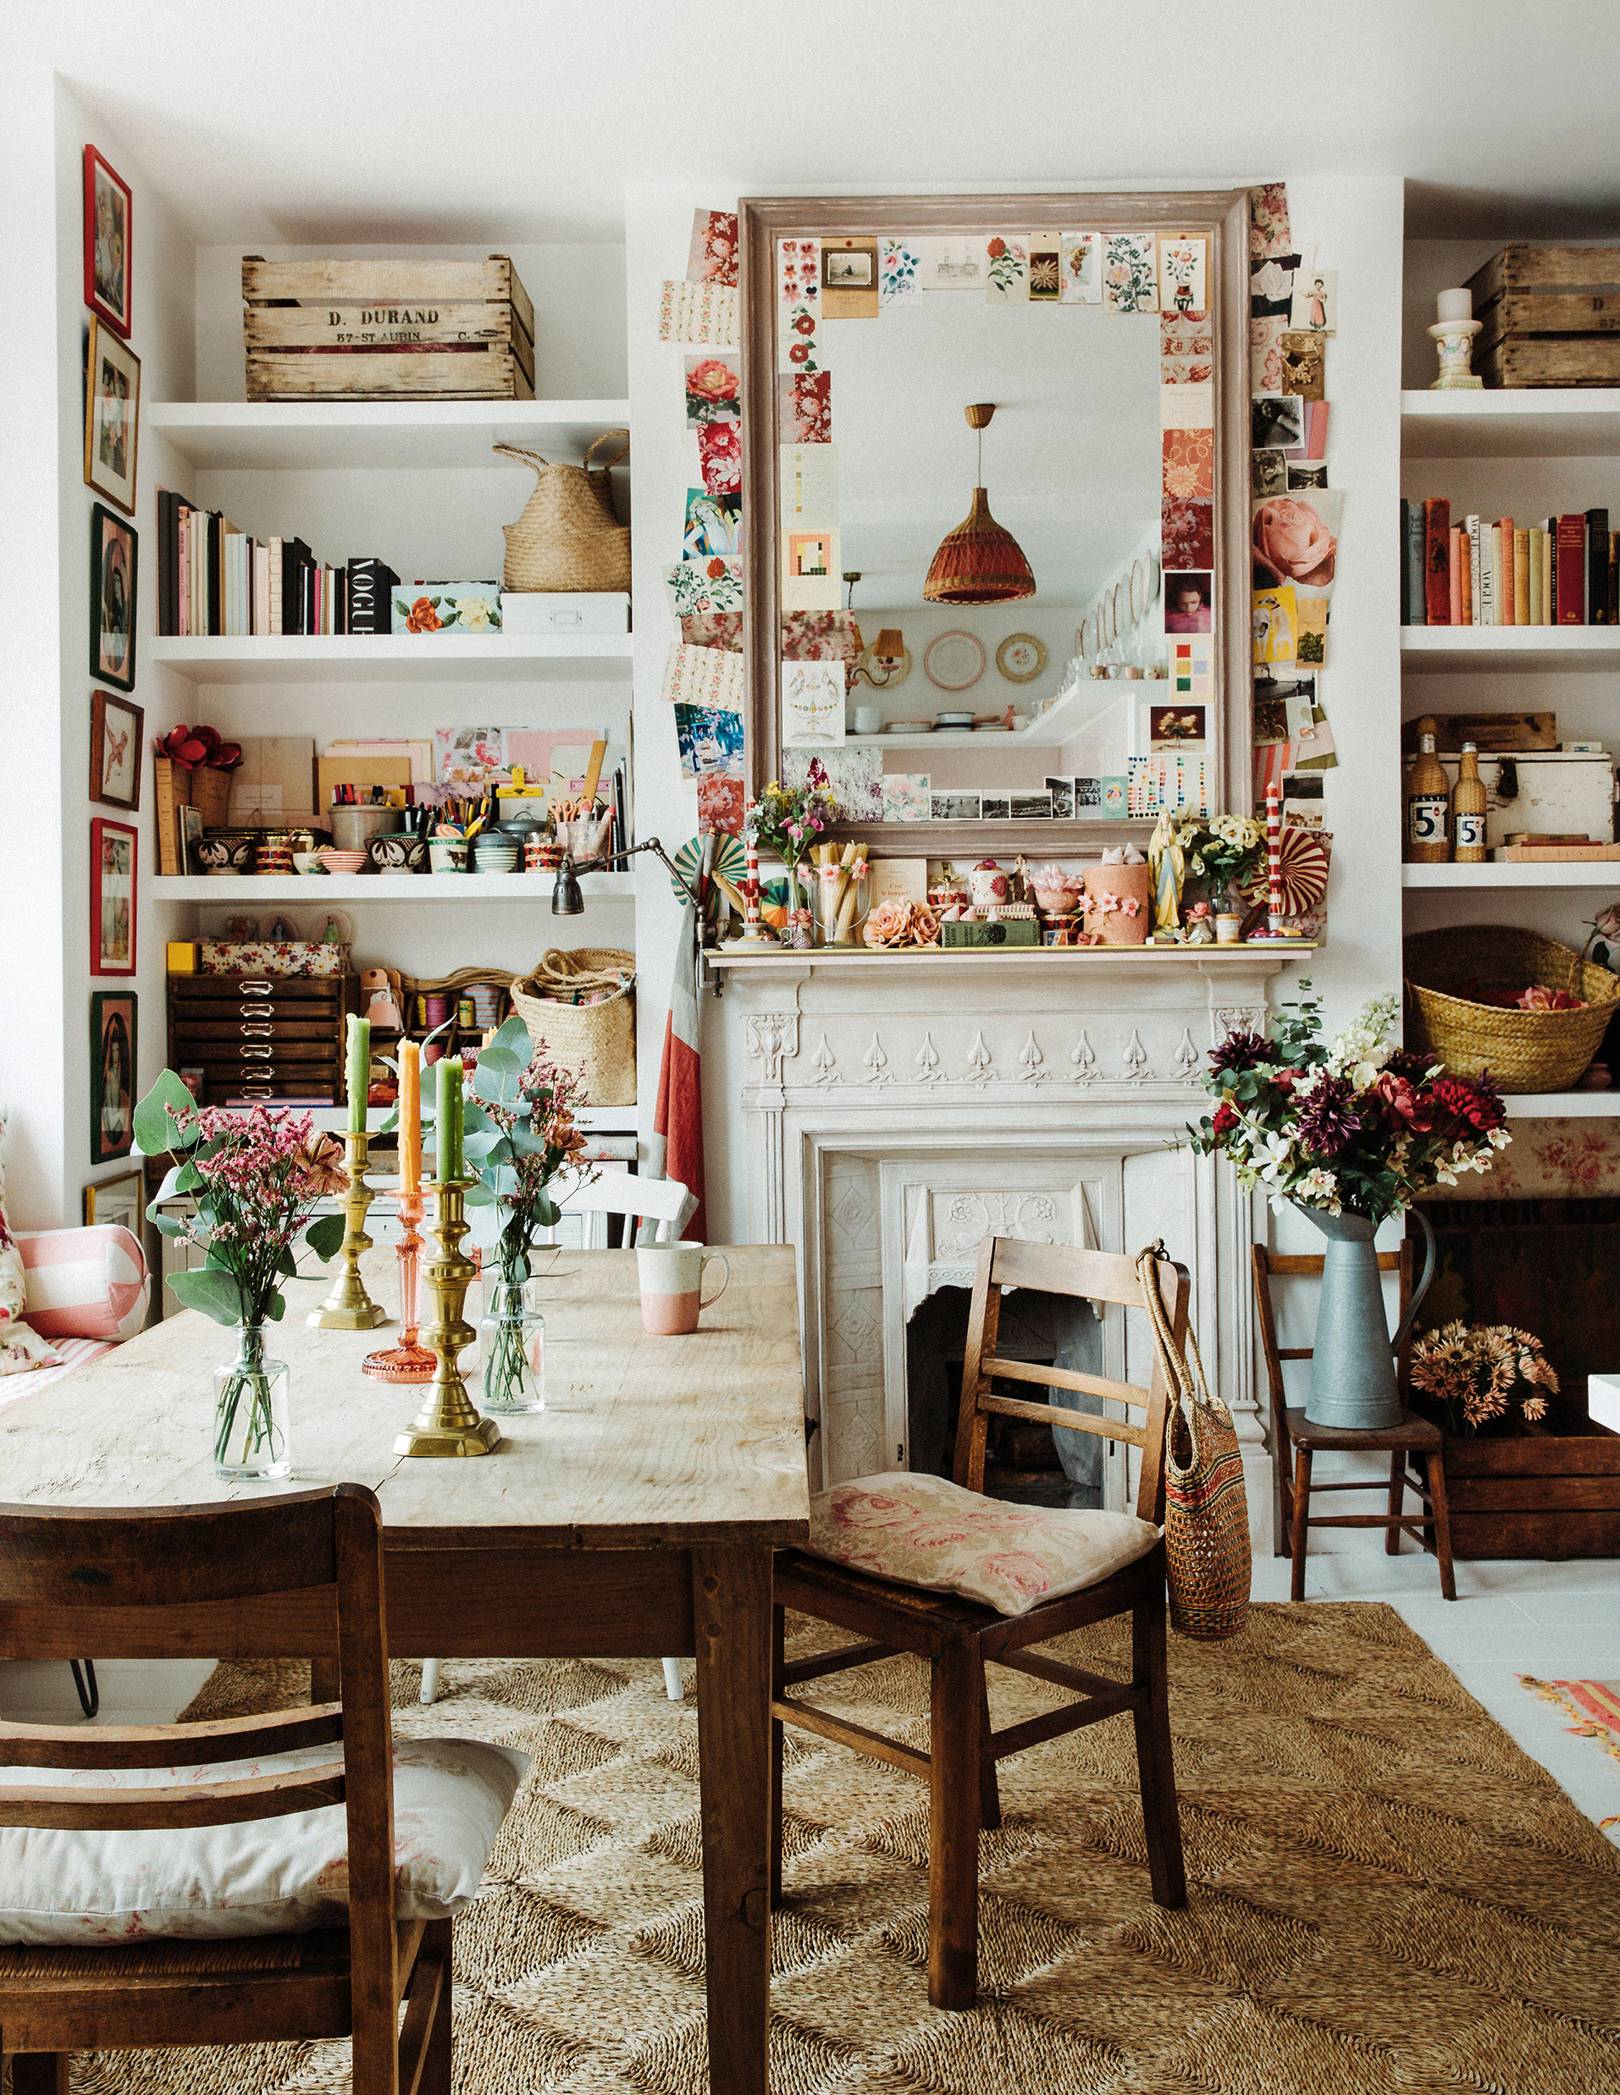 granny chic romantic style in this eclectic layered dining room |violet dent house tour